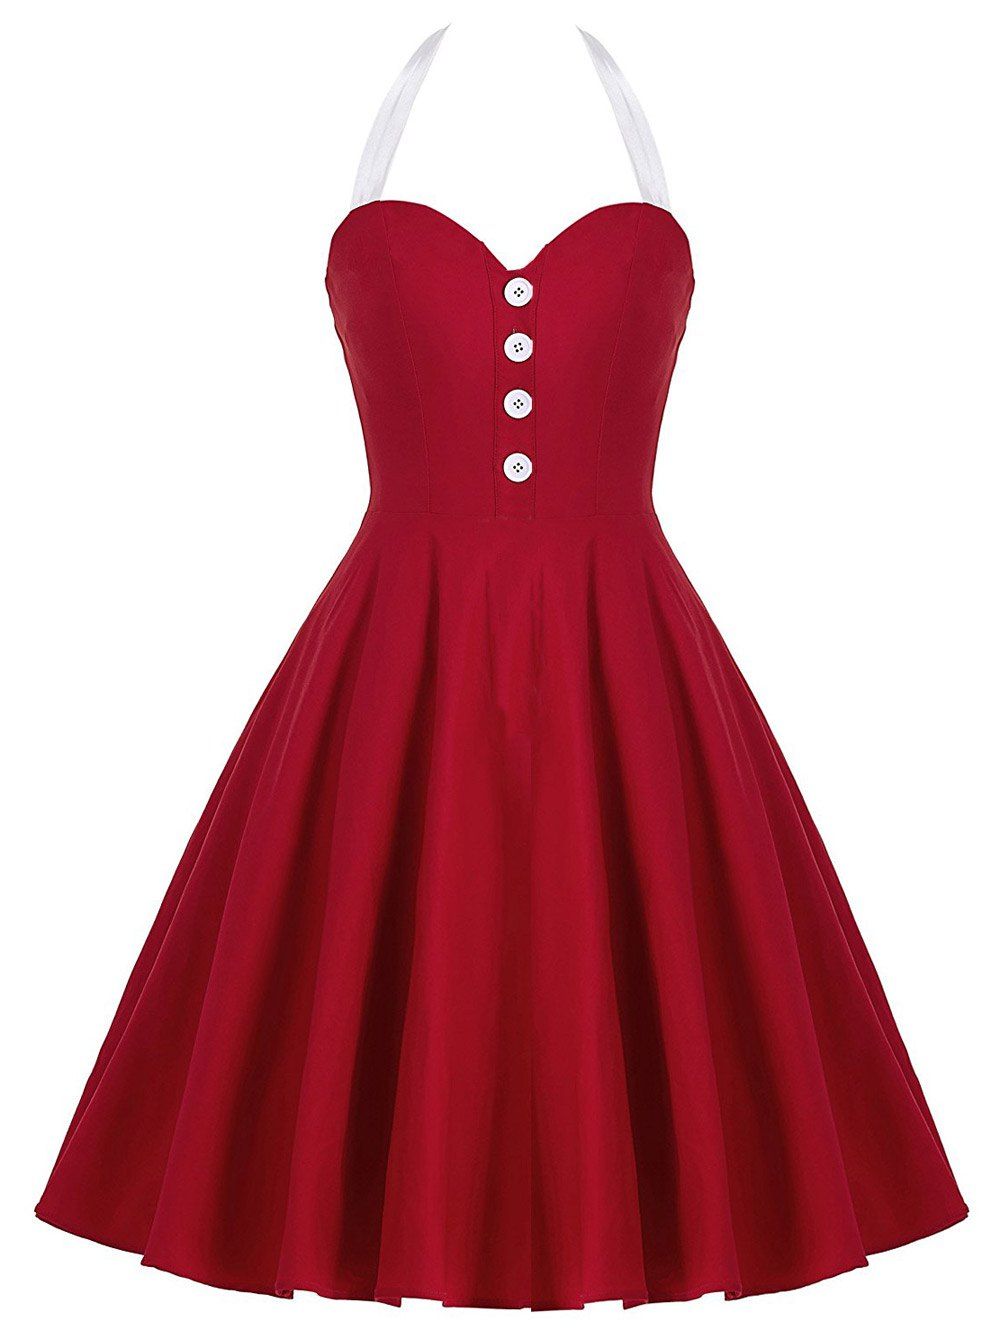 [41% OFF] 2021 Cocktail Halter Backless Mini Pin Up Dress In RED ...